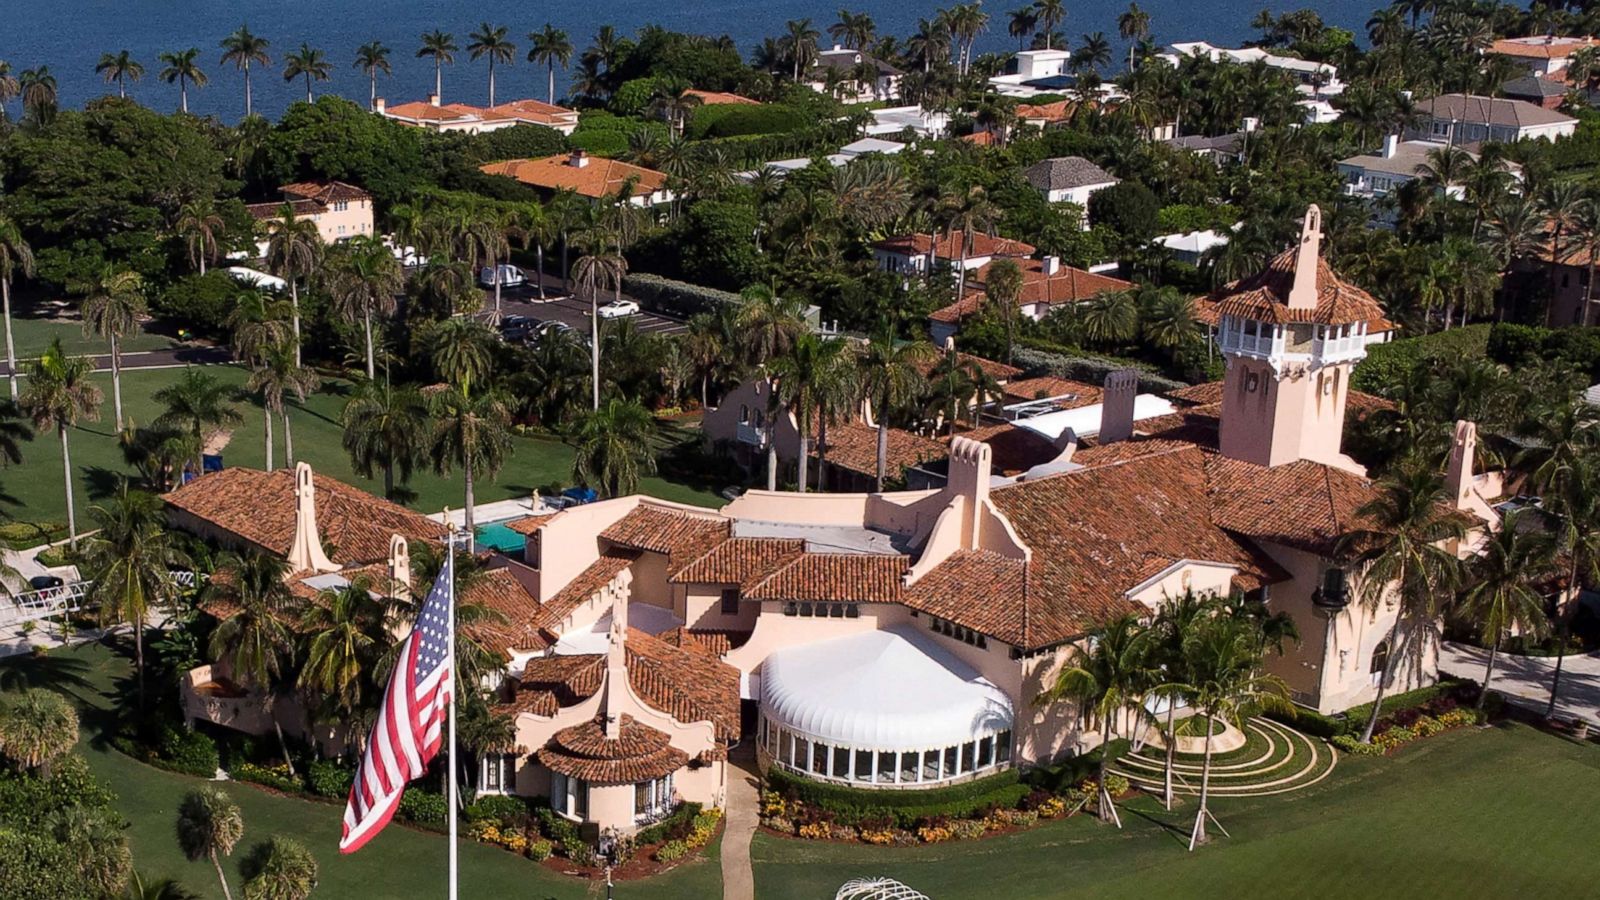 Archives letter shows extent of classified material previously at Mar-a-Lago